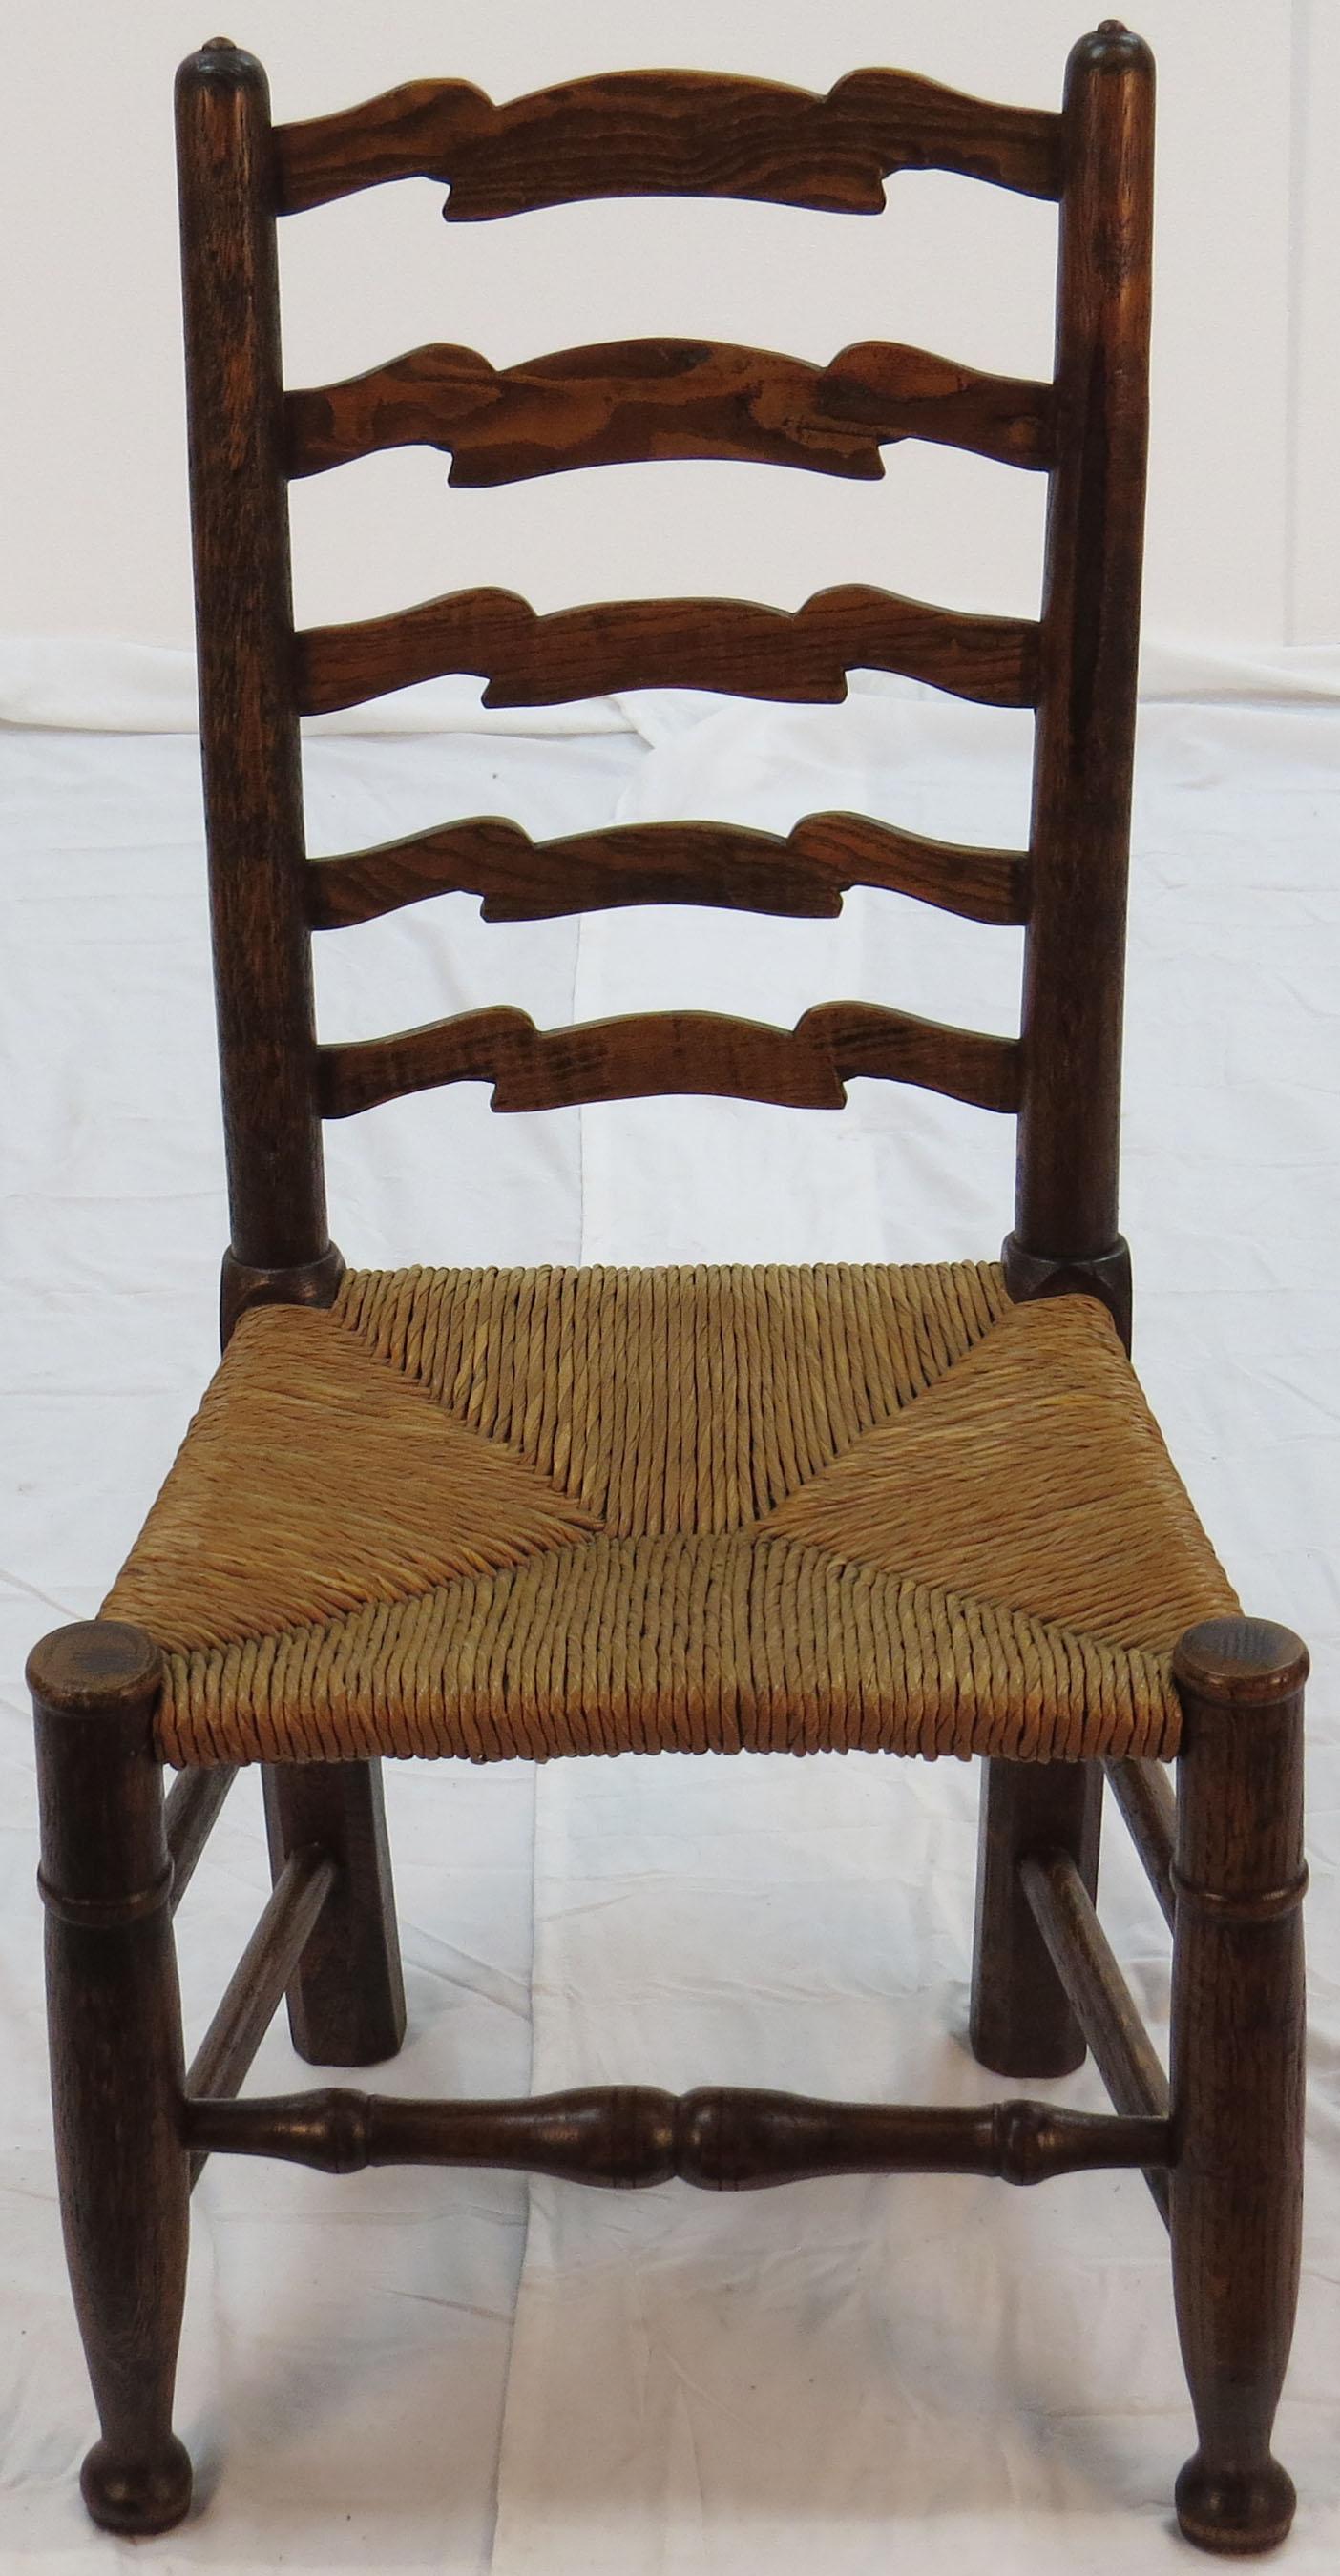 These solid oak antique ladder back dining chairs have been finished a dark color and have been nicely worn since they were made. This wear from normal use is what creates a lovely patina on furniture that is so desirable. This patina gives the wood